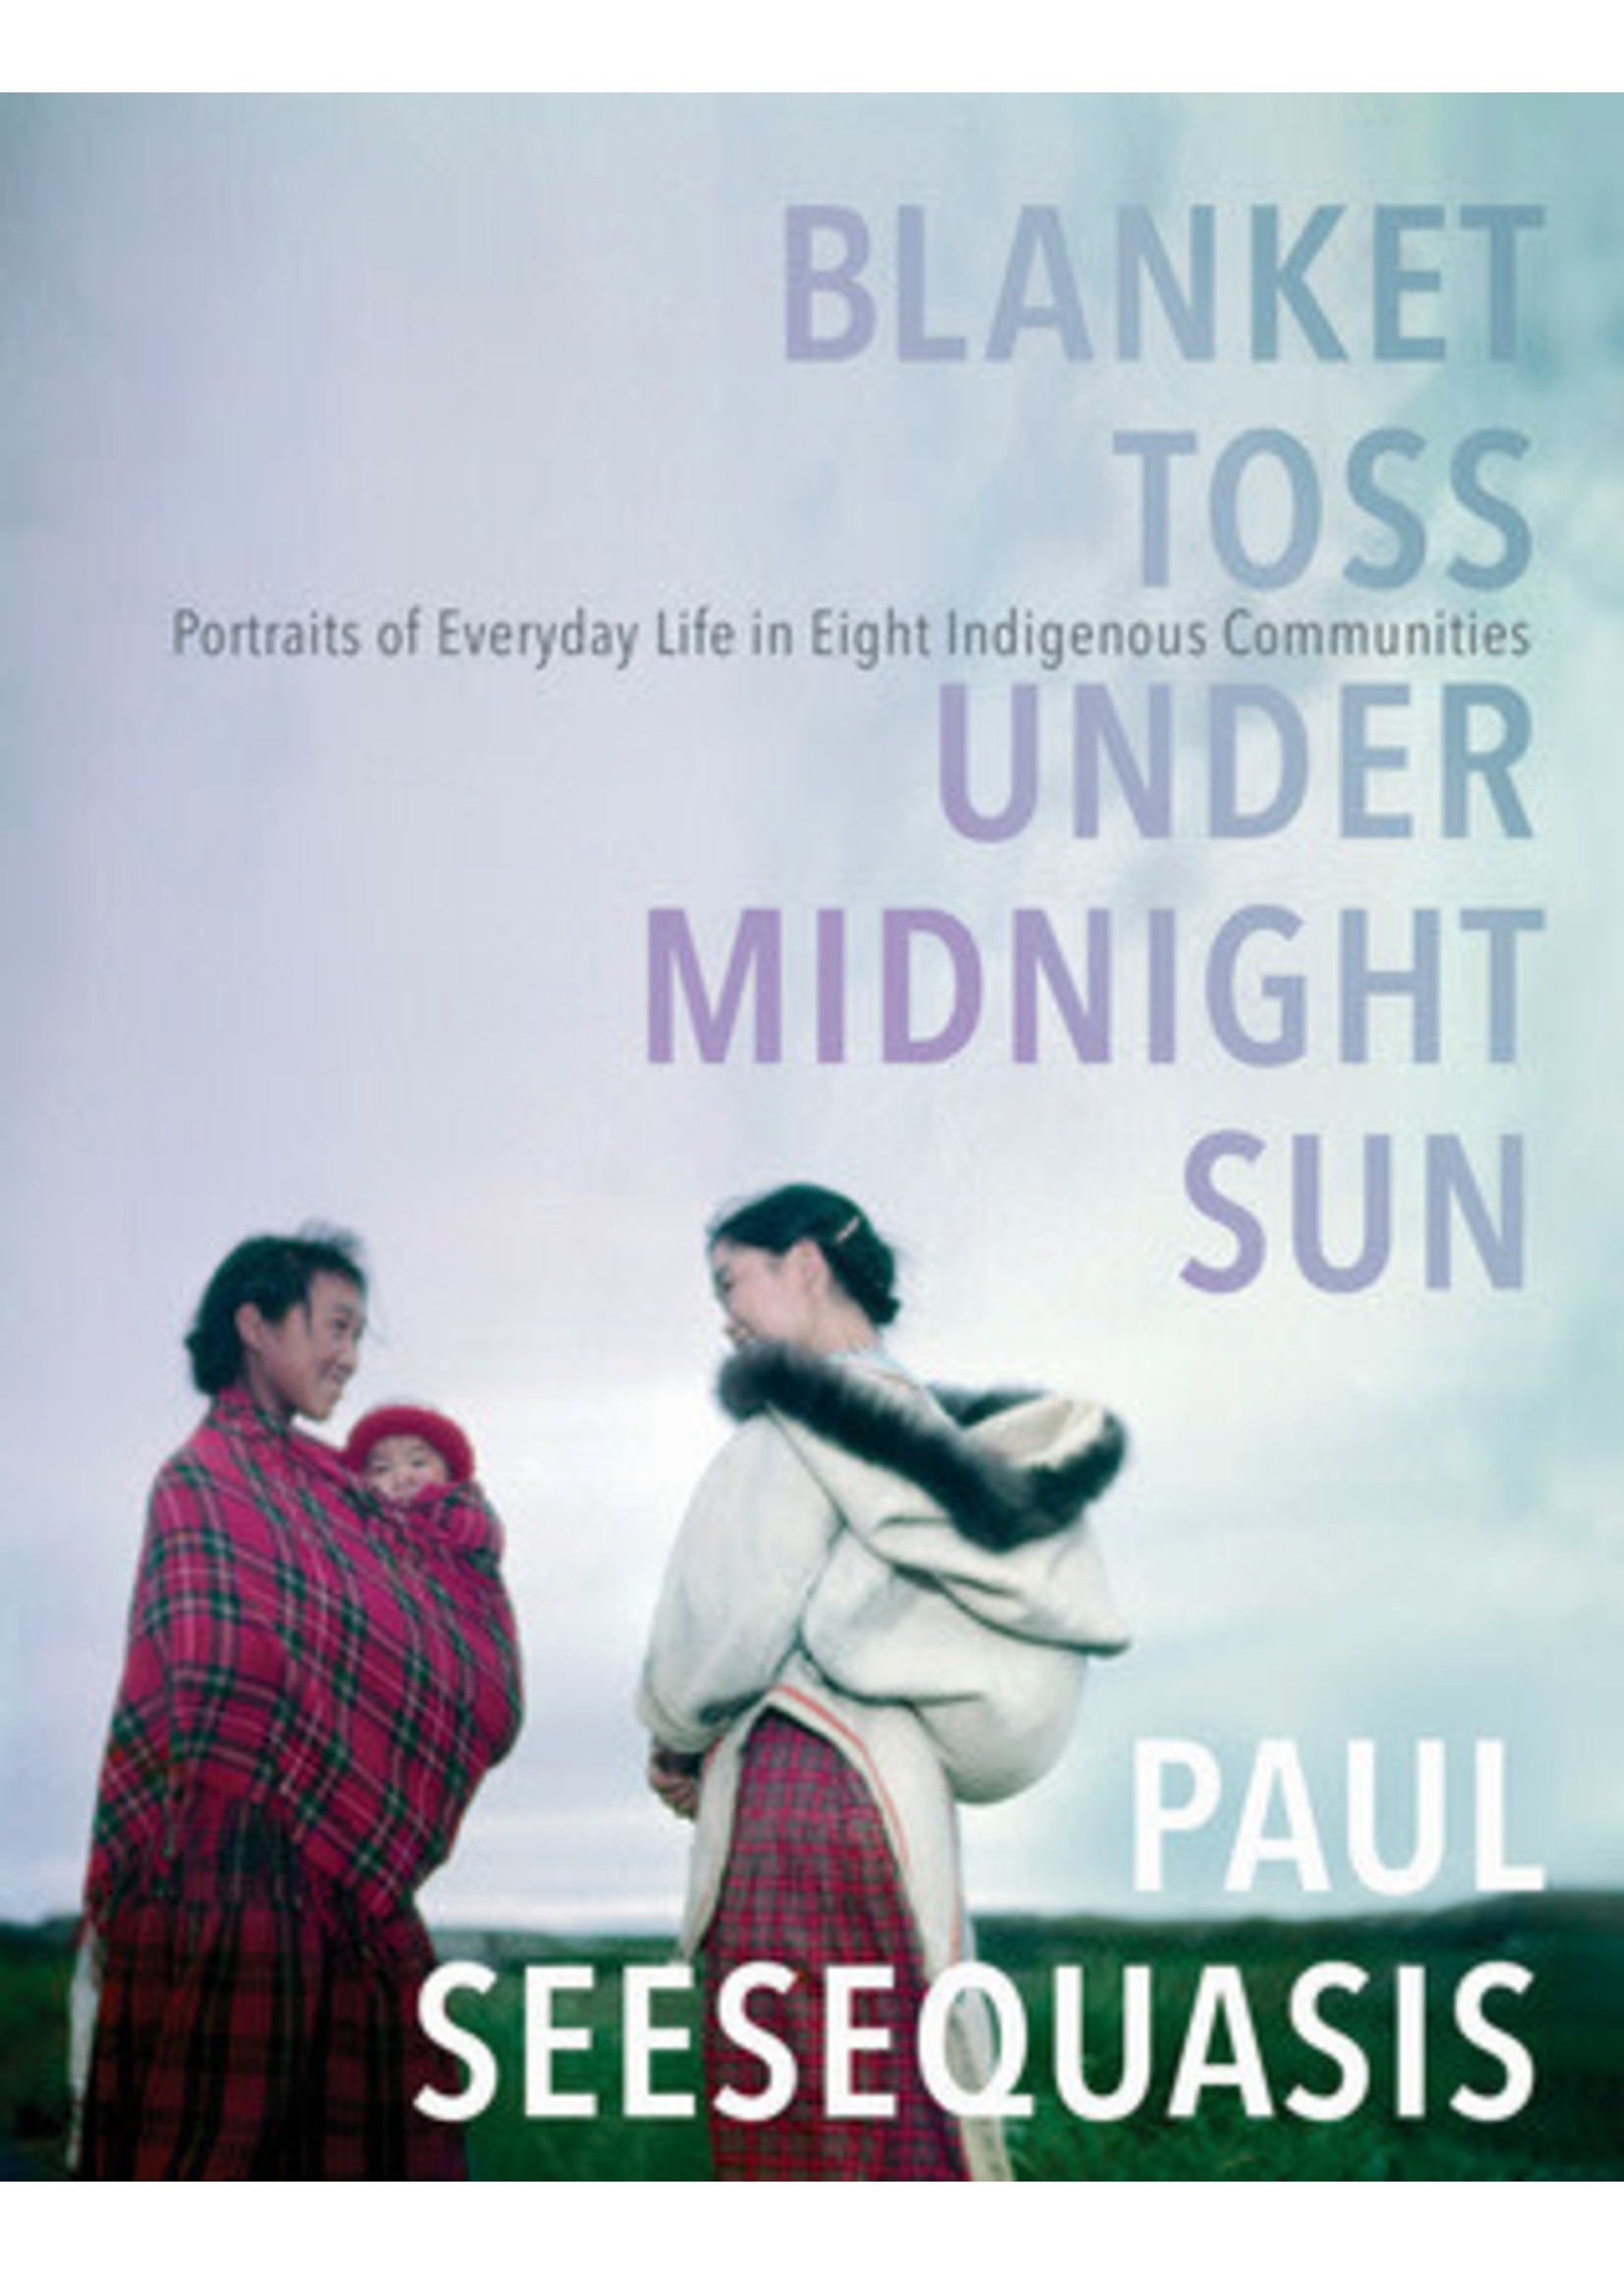 Blanket Toss Under Midnight Sun: Portraits of Everyday Life in Eight Indigenous Communities by Paul Seesequasis